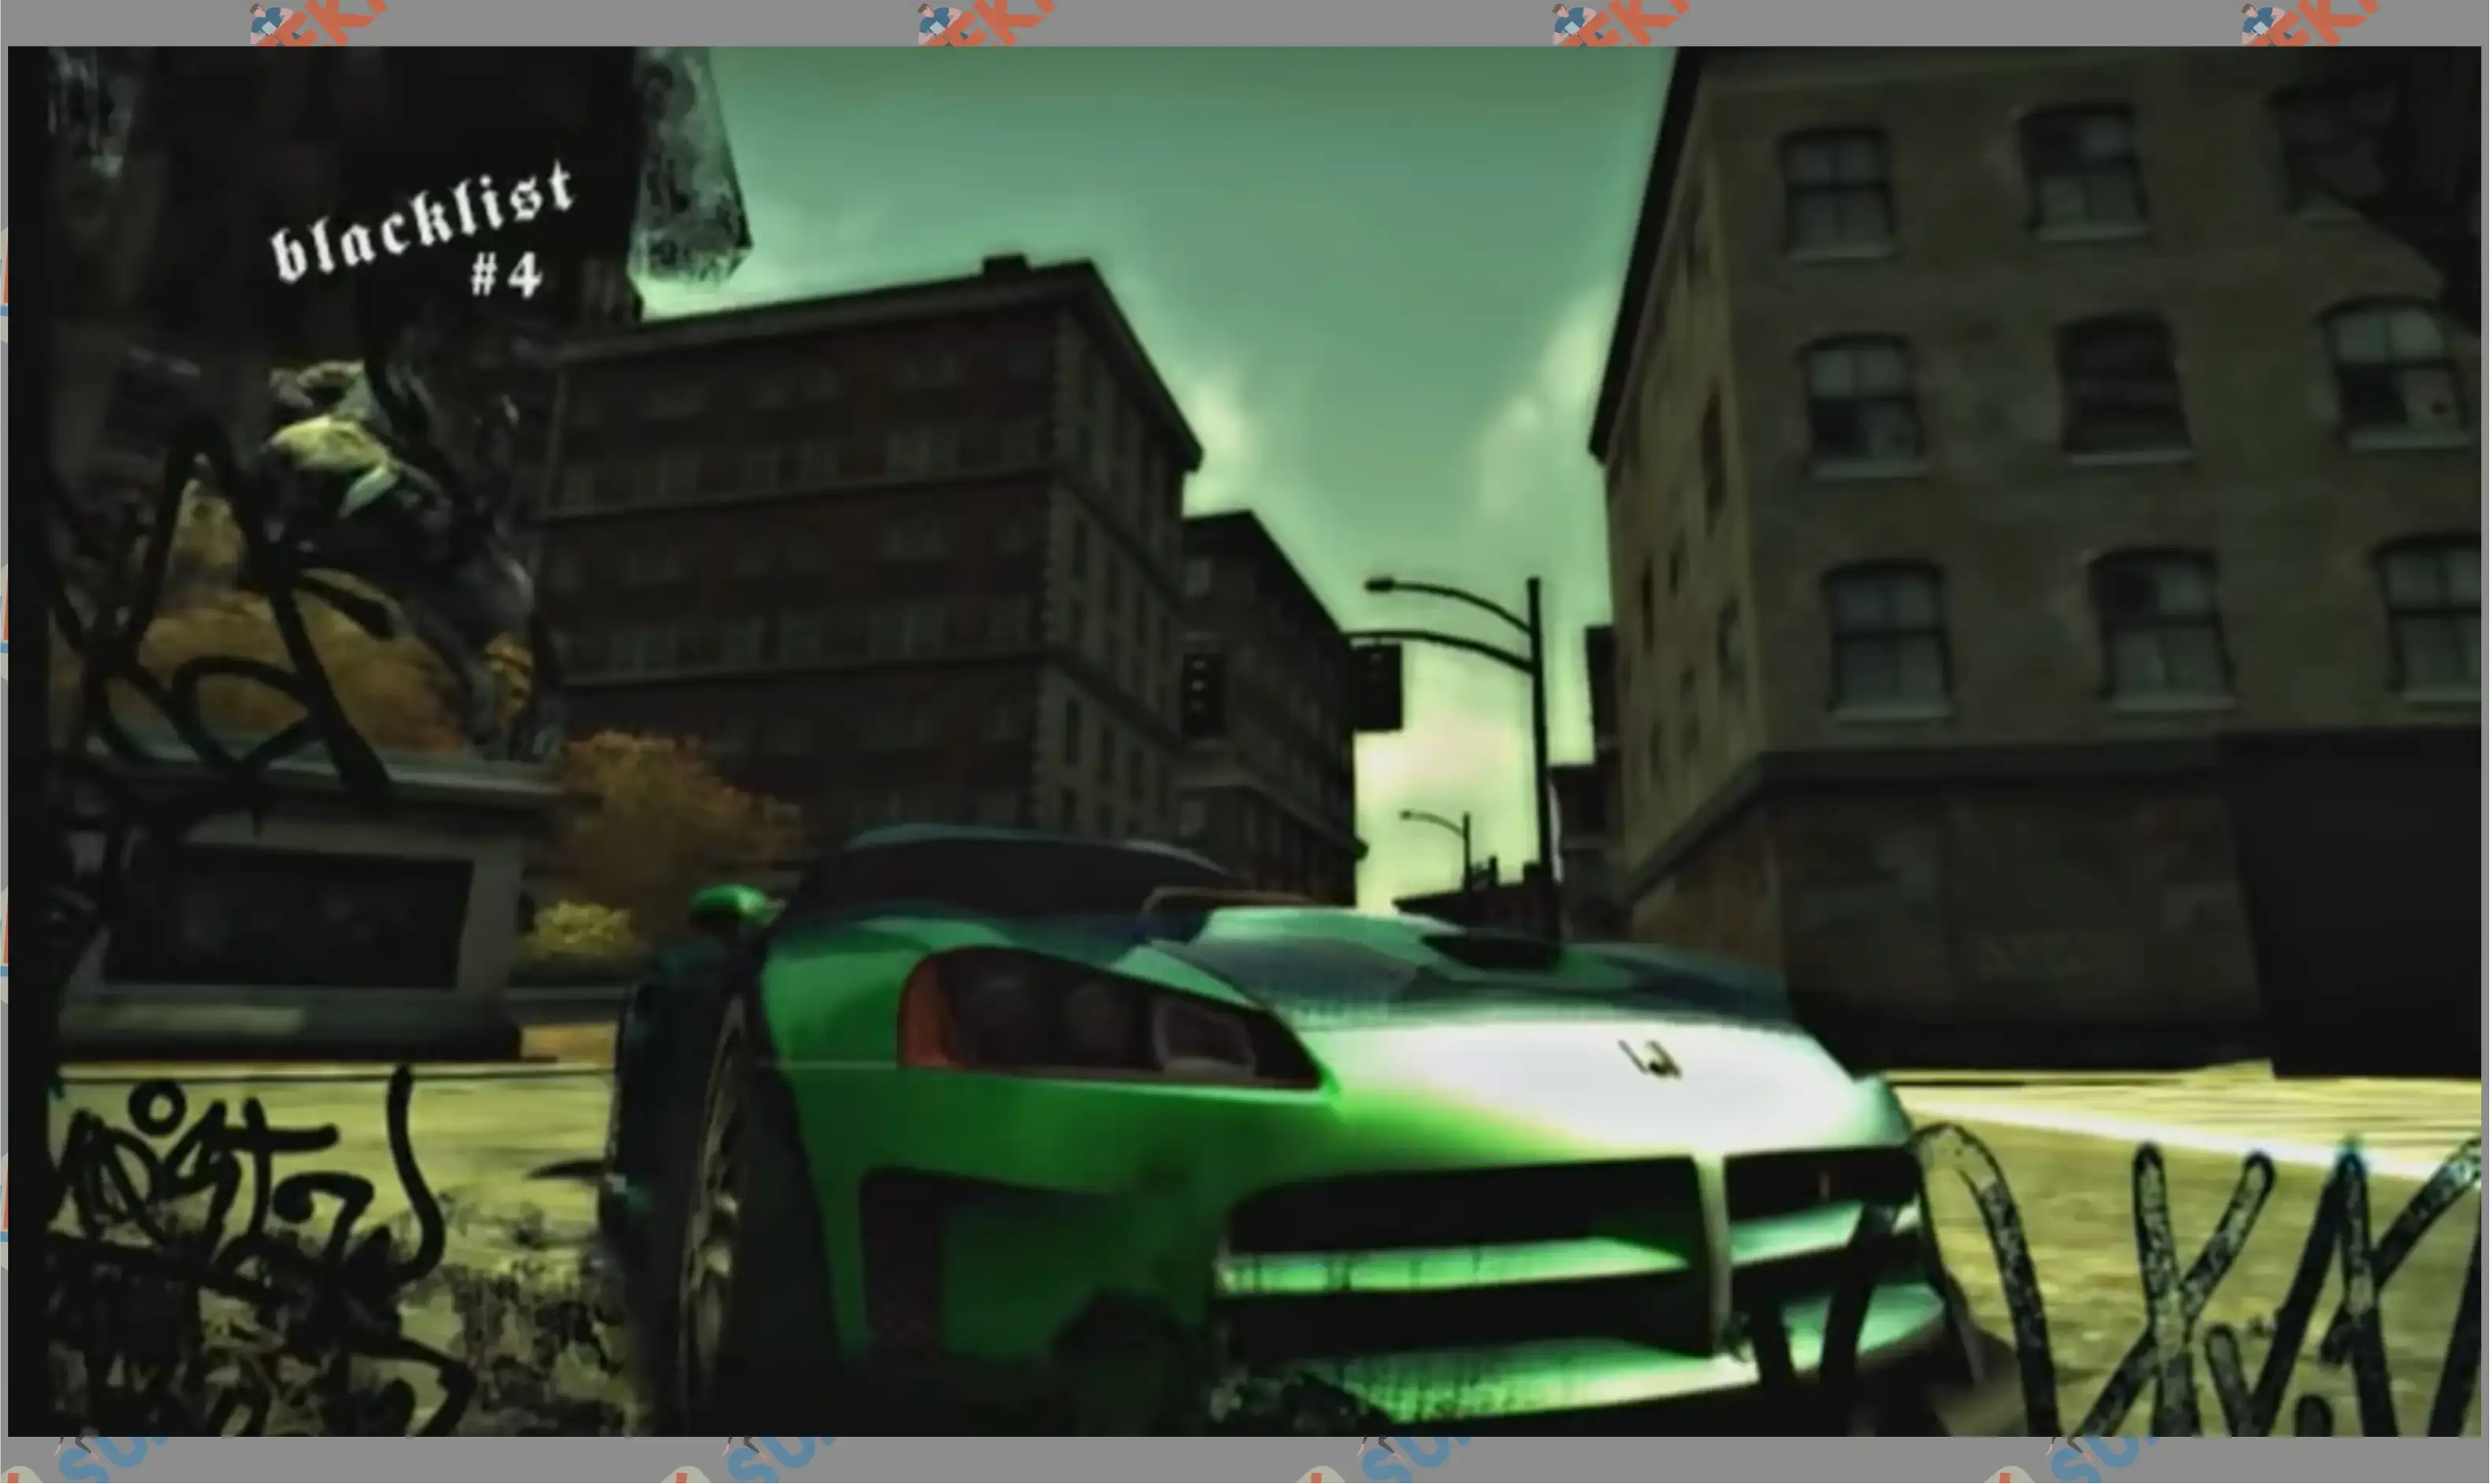 12 blacklist 4 - 15 Blacklist Need For Speed Most Wanted